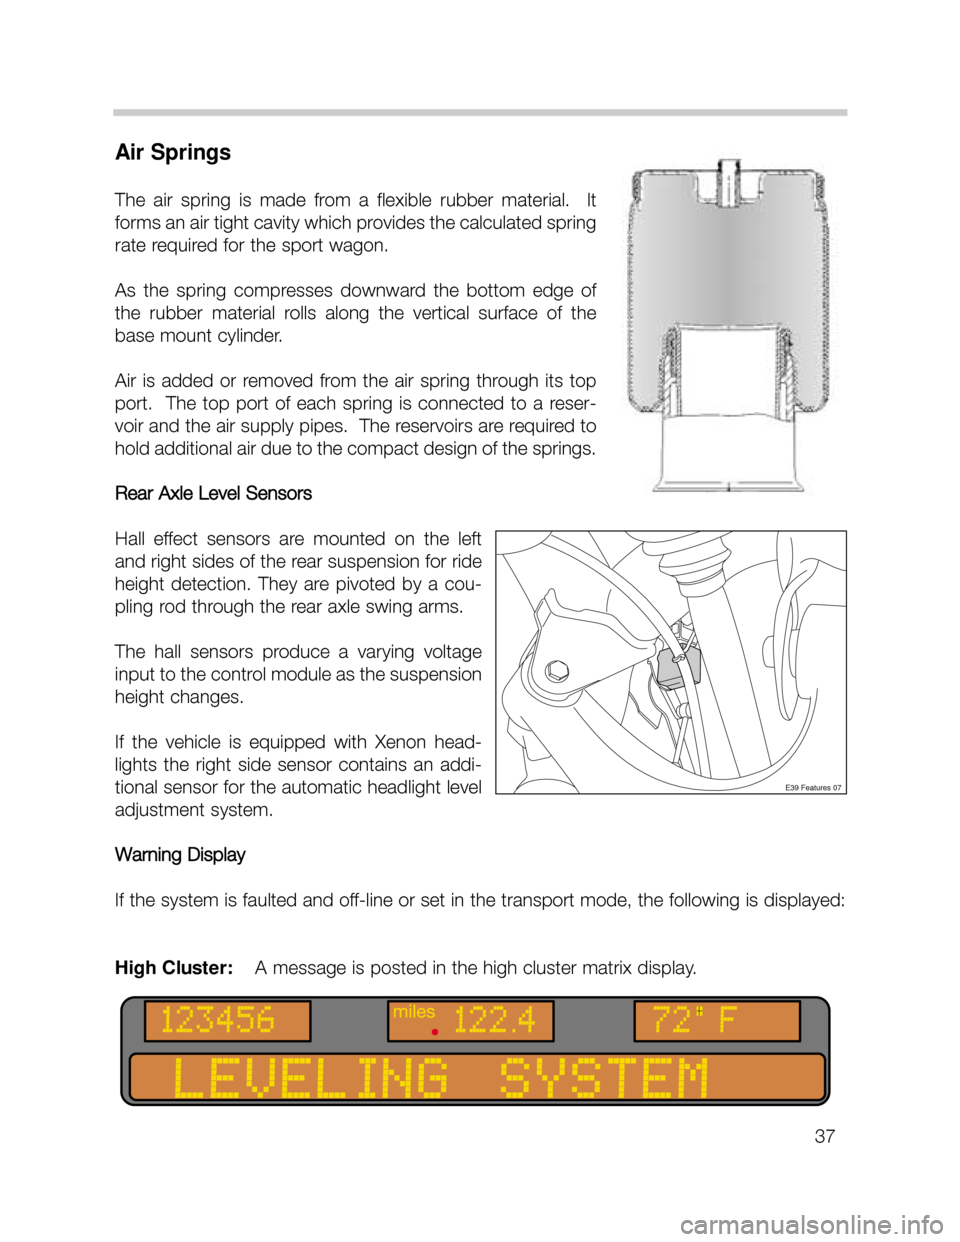 BMW X5 2003 E53 Workshop Manual Air Springs
The  air  spring  is  made  from  a  flexible  rubber  material.    It
forms an air tight cavity which provides the calculated spring
rate required for the sport wagon.
As  the  spring  co